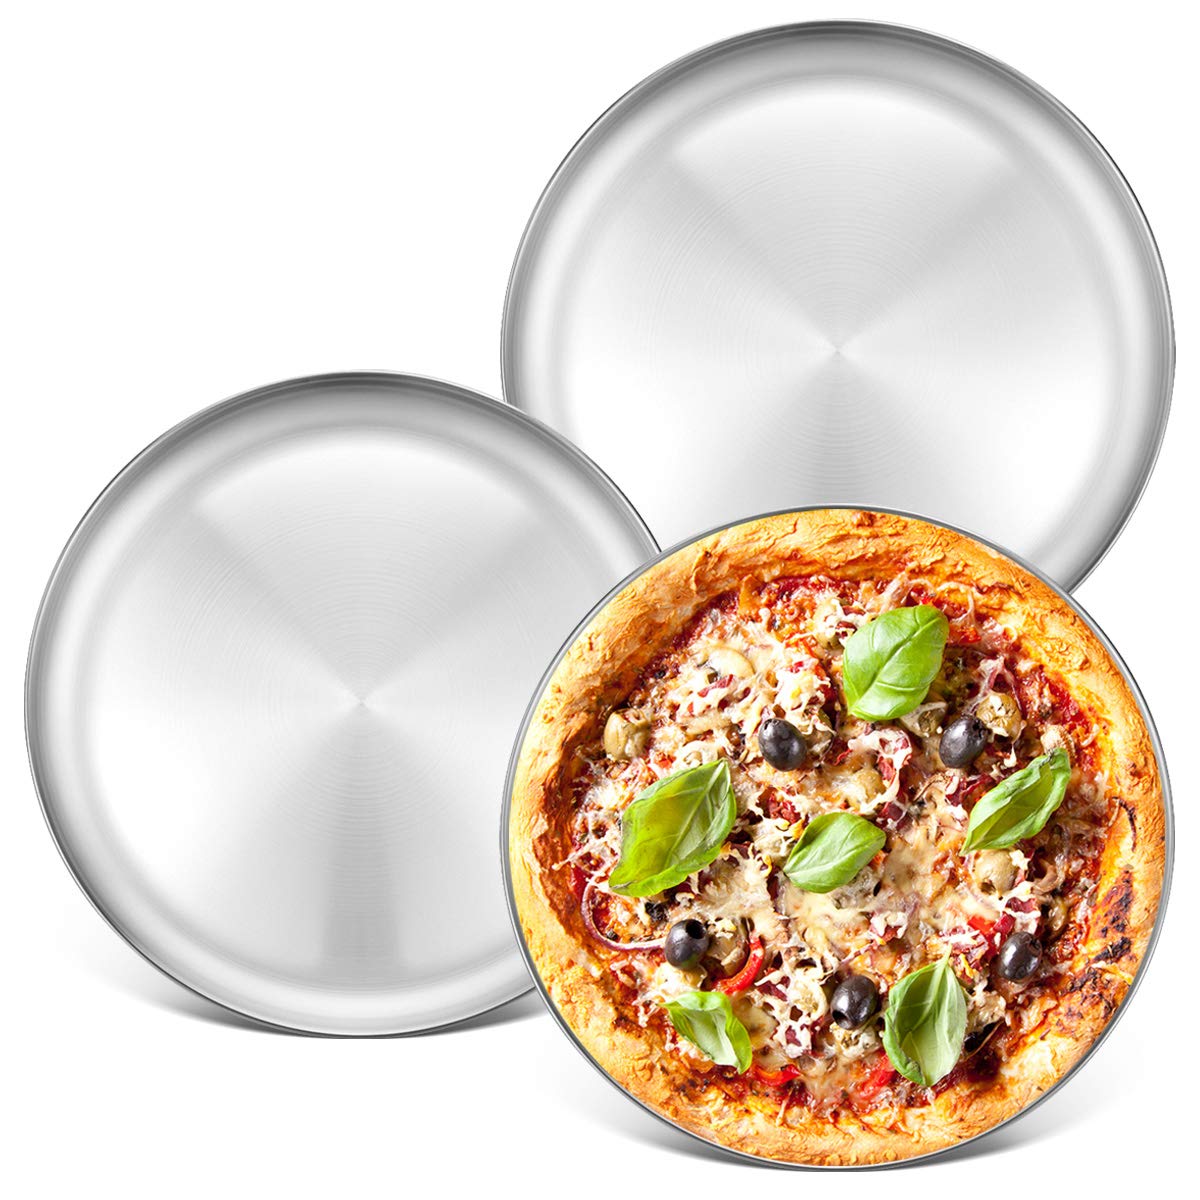 Deedro Stainless Steel Pizza Pan 13½ inch Round Pizza Tray Pizza Baking Sheet, Healthy Pizza Baking Pan Pizza Serving Tray Crisper Pan, Dishwasher Safe, 3 Pack